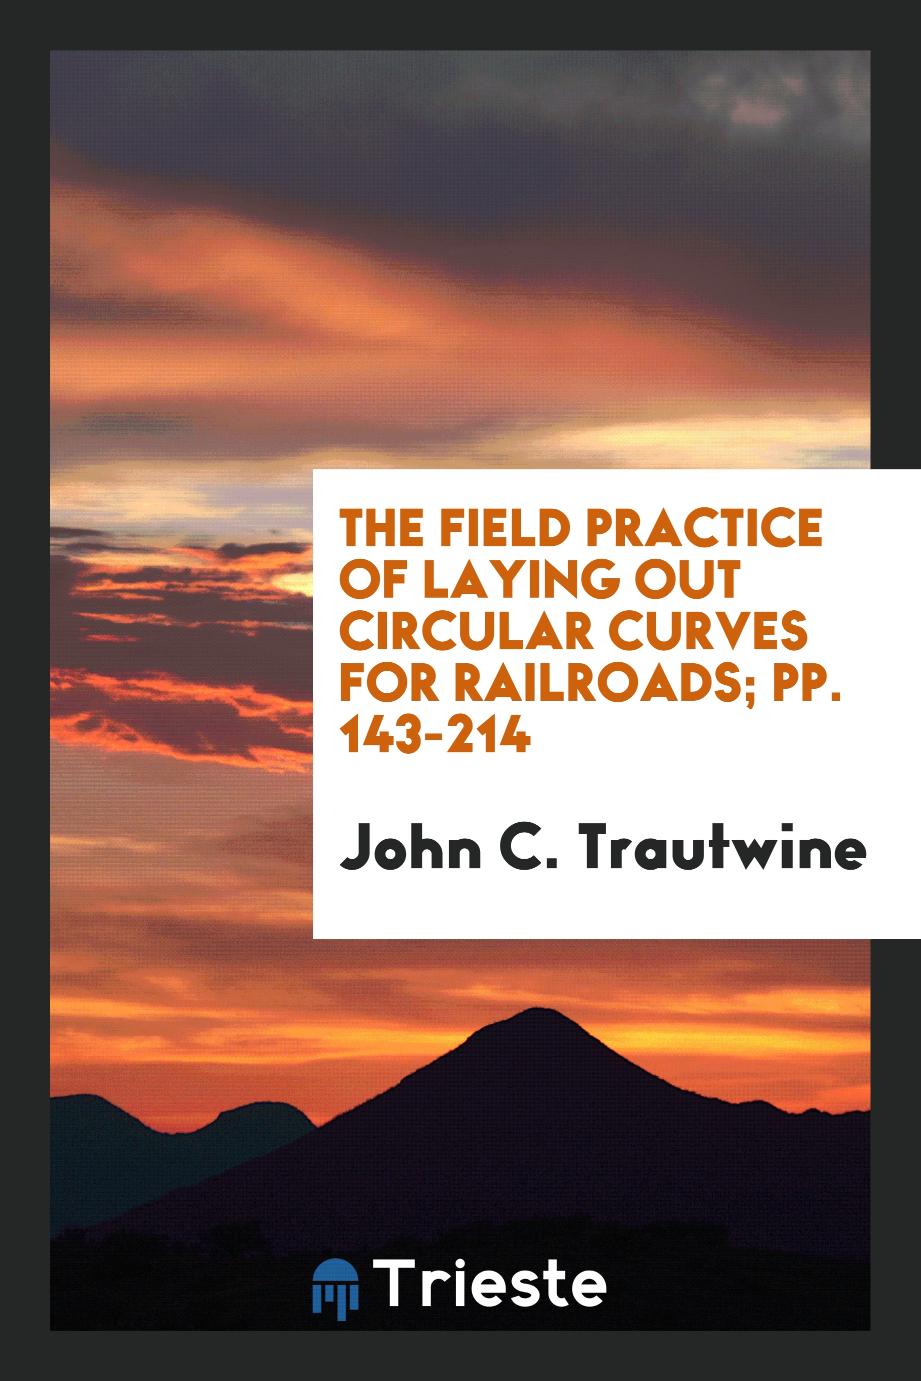 The Field Practice of Laying Out Circular Curves for Railroads; pp. 143-214